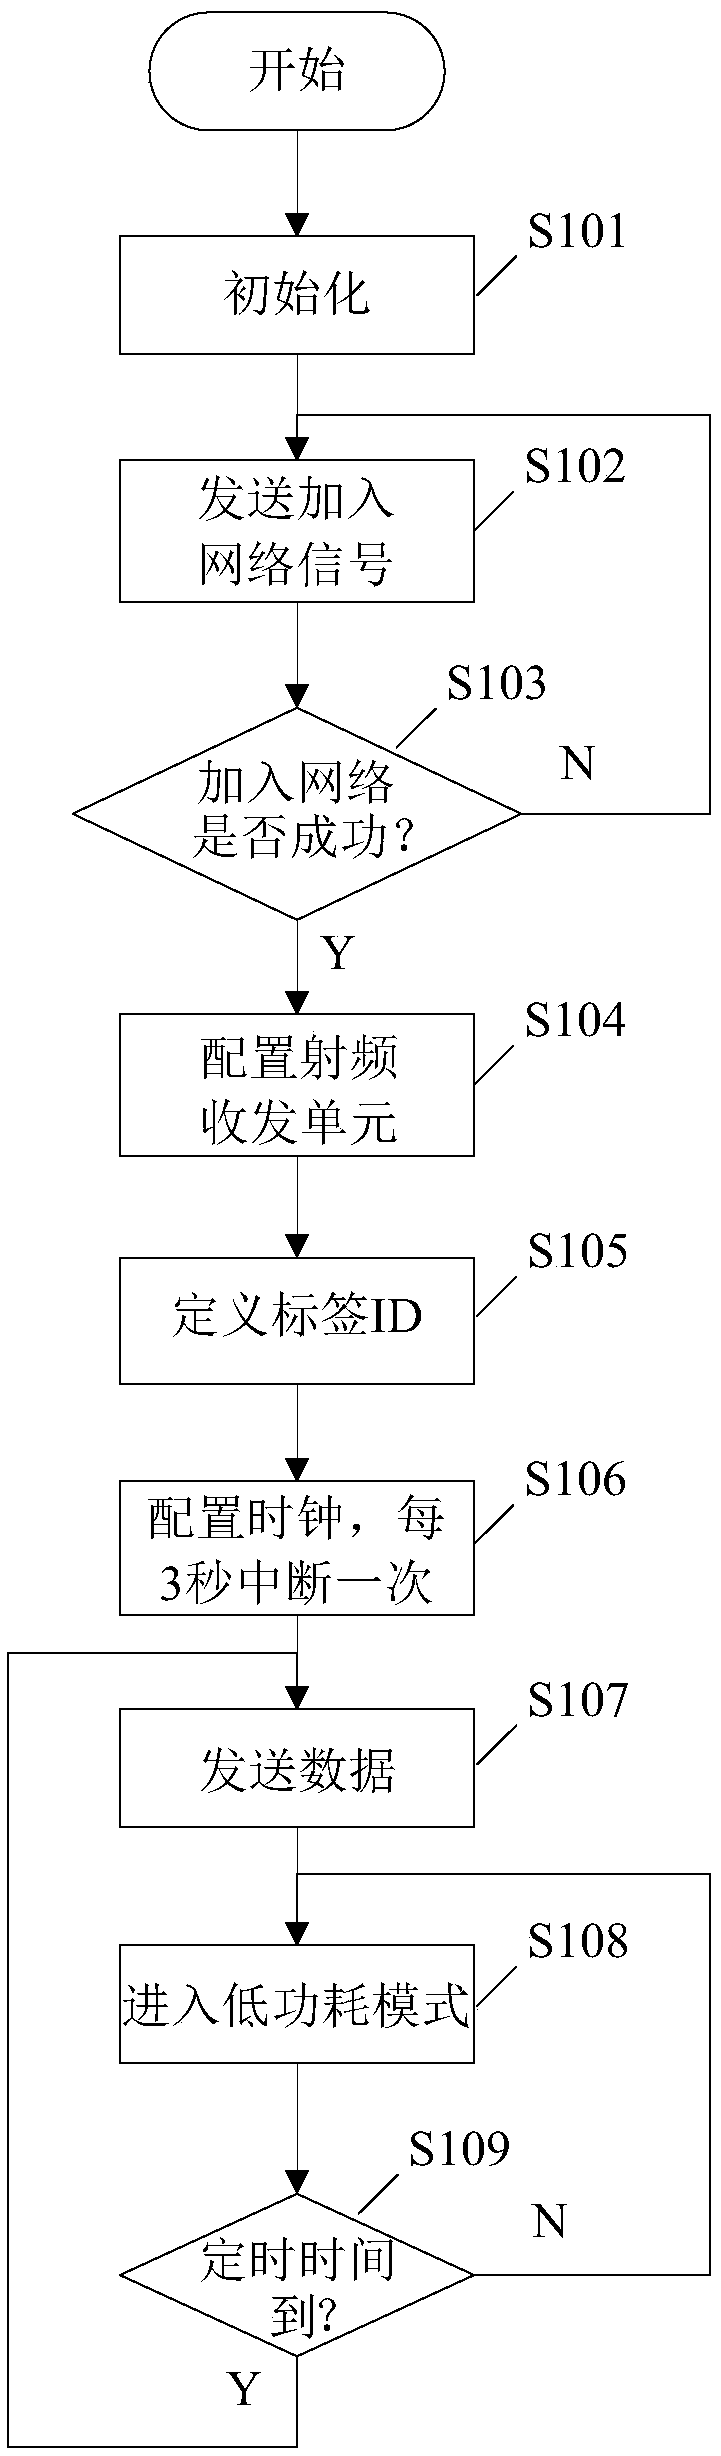 Sailor area positioning and management system based on active label bracelet, and method thereof